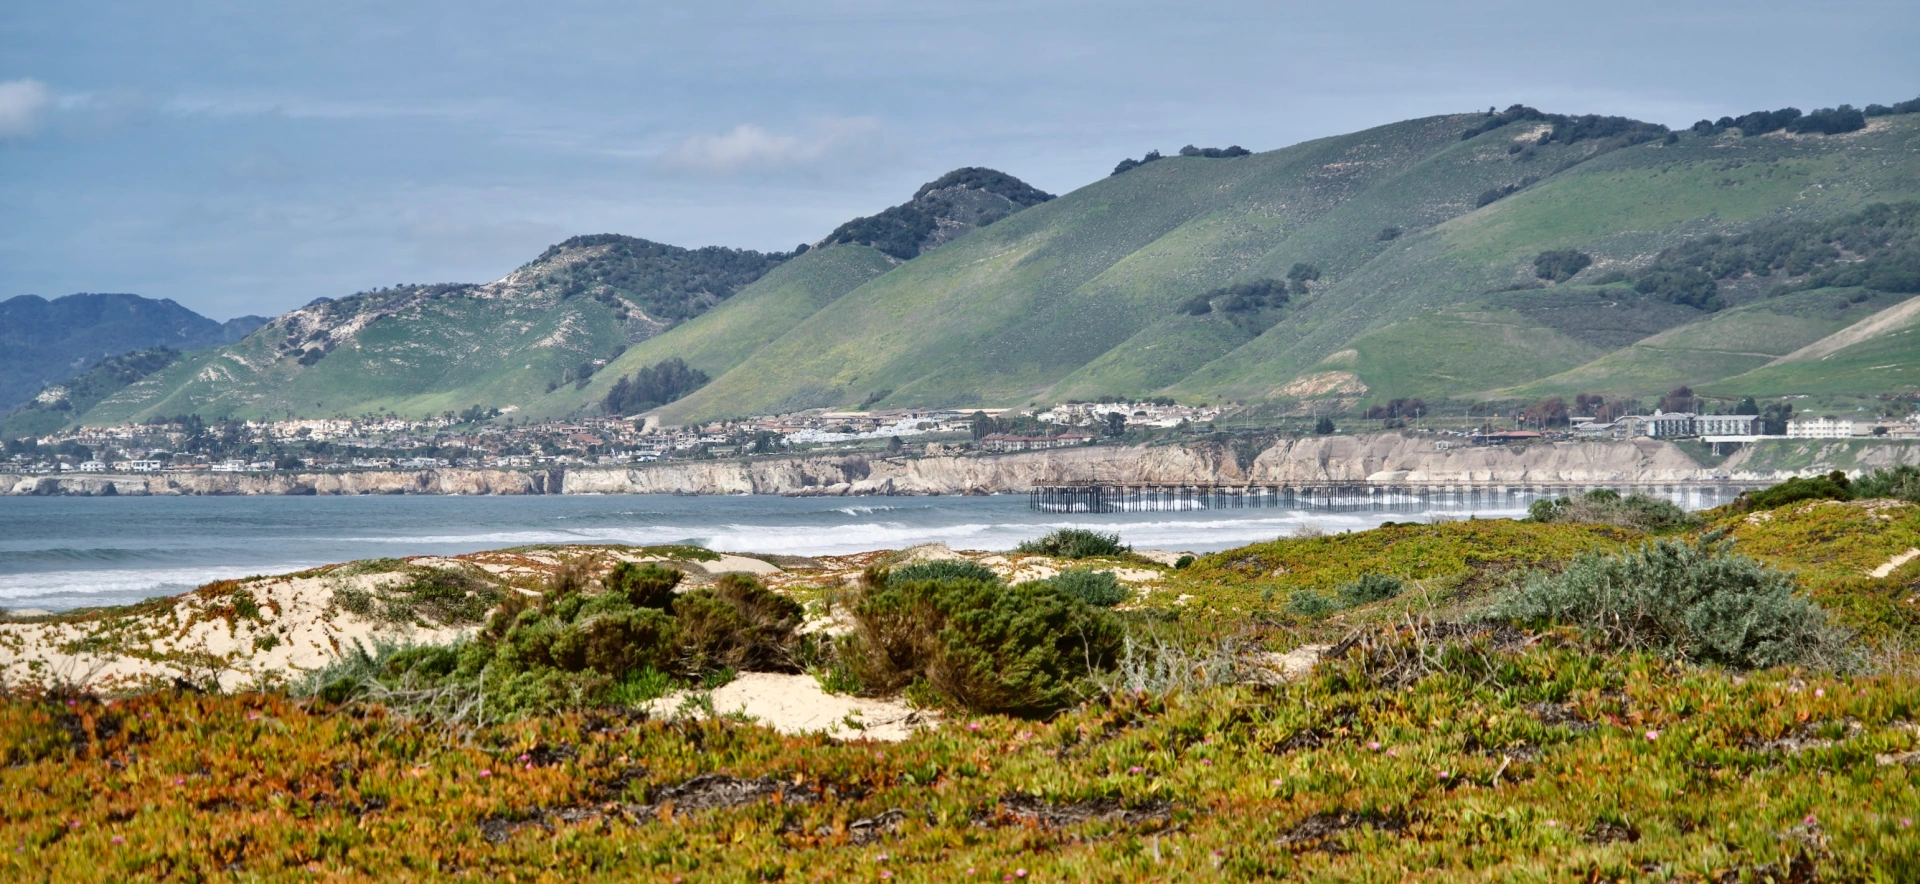 Pismo Beach seen from the dunes south of town